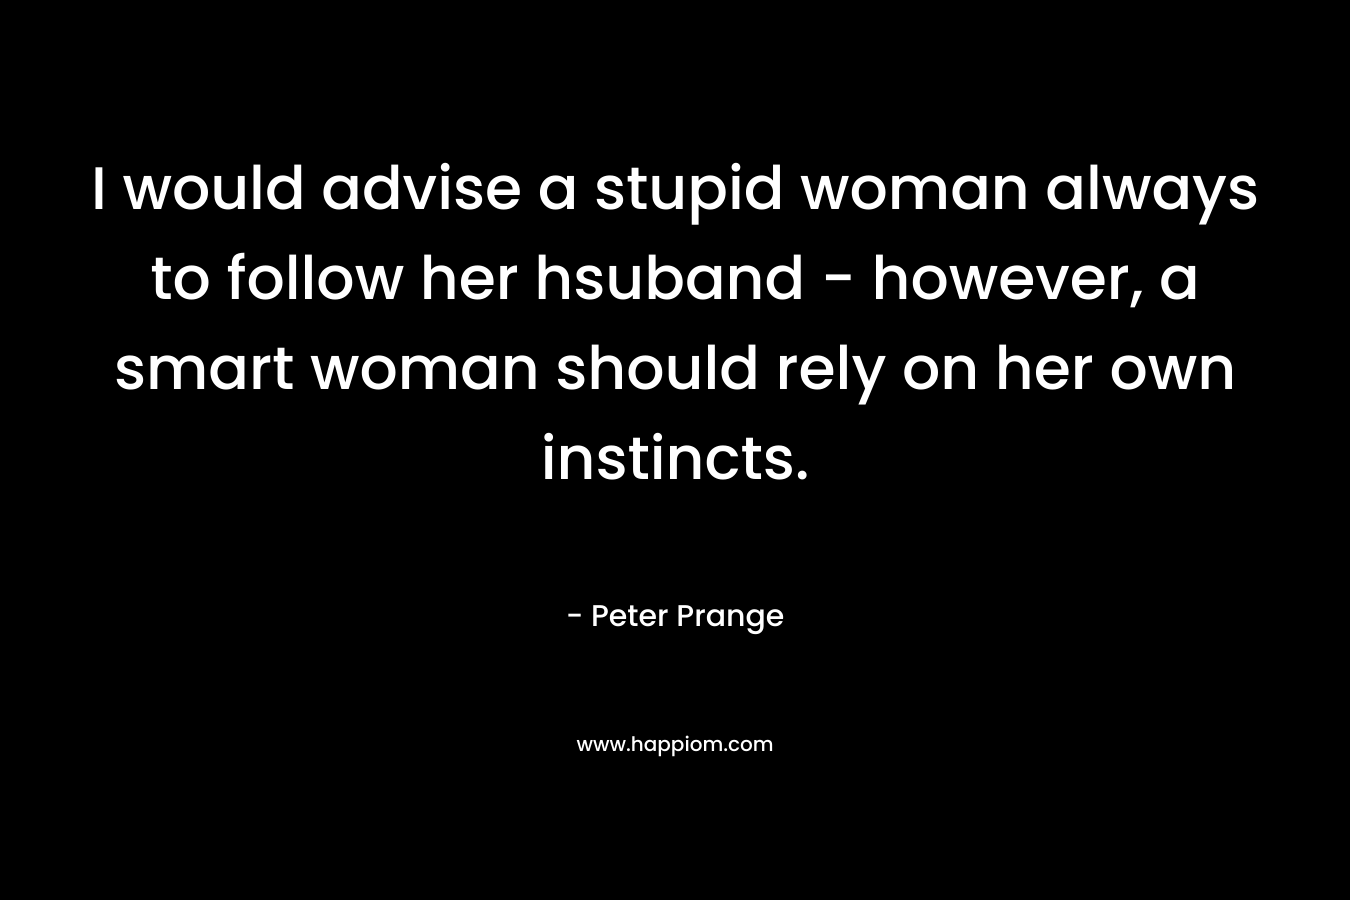 I would advise a stupid woman always to follow her hsuband - however, a smart woman should rely on her own instincts.